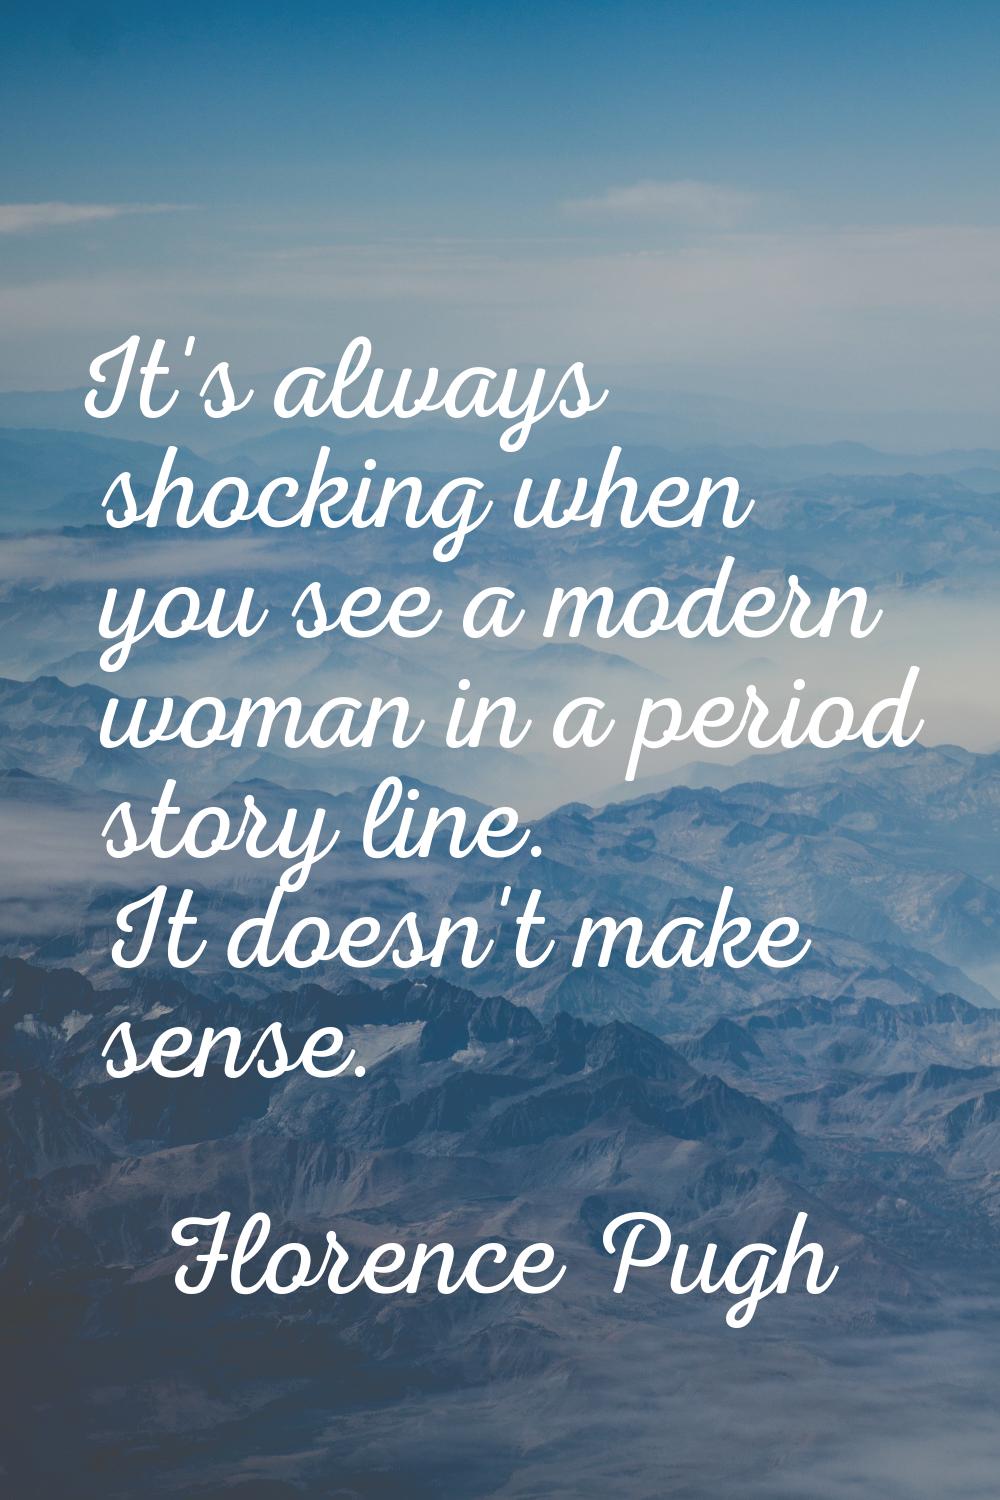 It's always shocking when you see a modern woman in a period story line. It doesn't make sense.